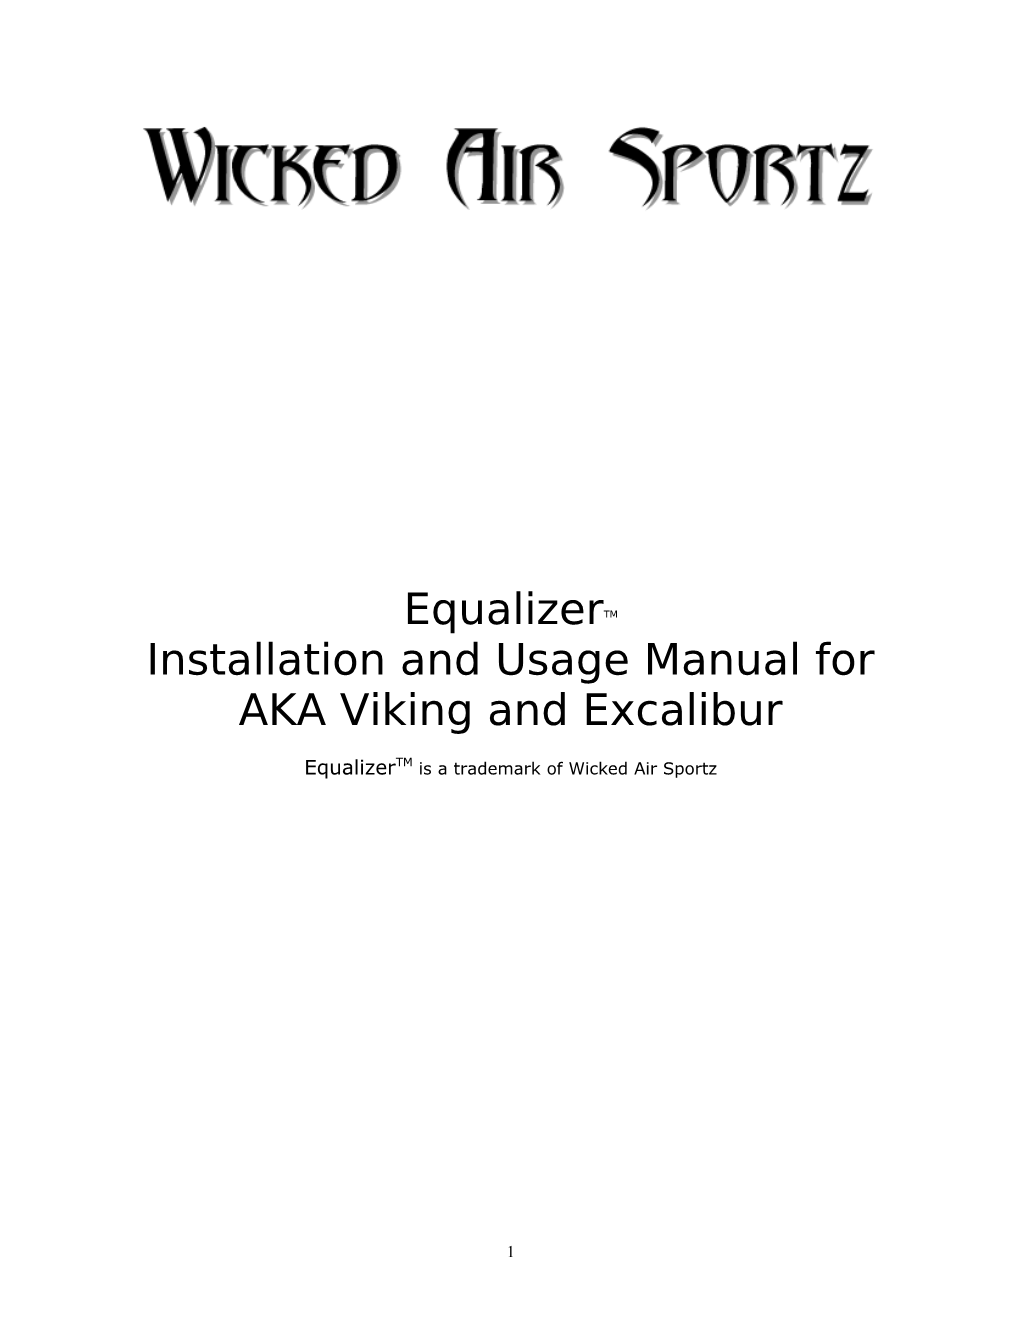 Installation and Usage Manual For